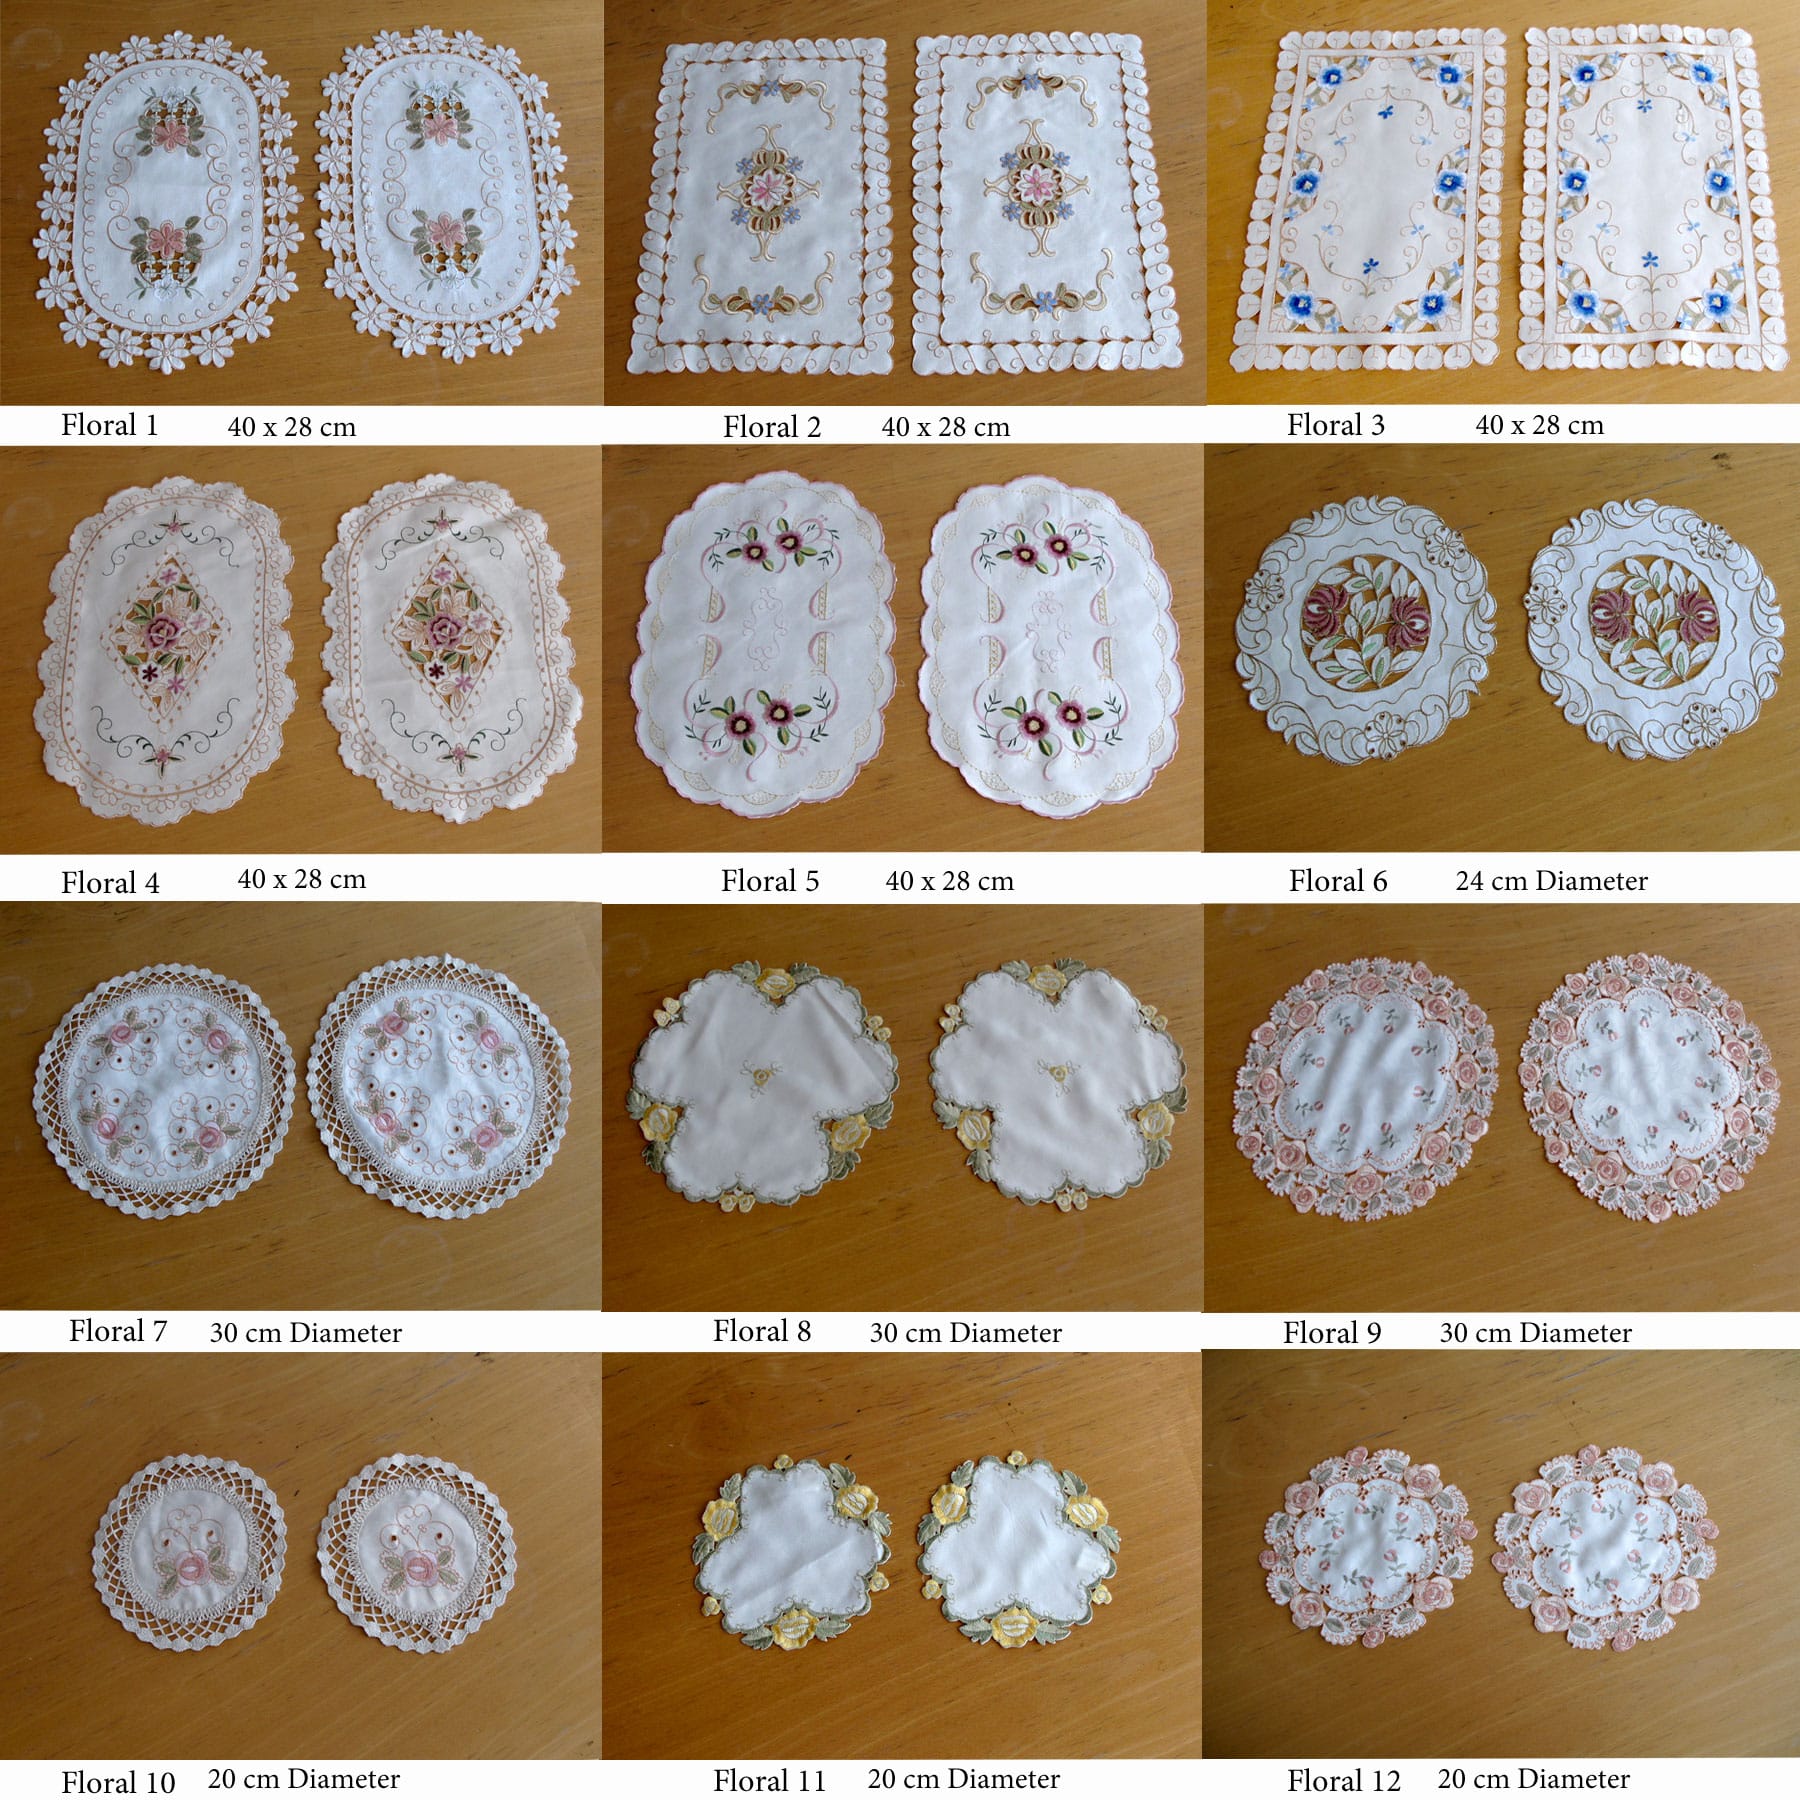 Set of 2 Embroidered Doilies Floral 11 - 0